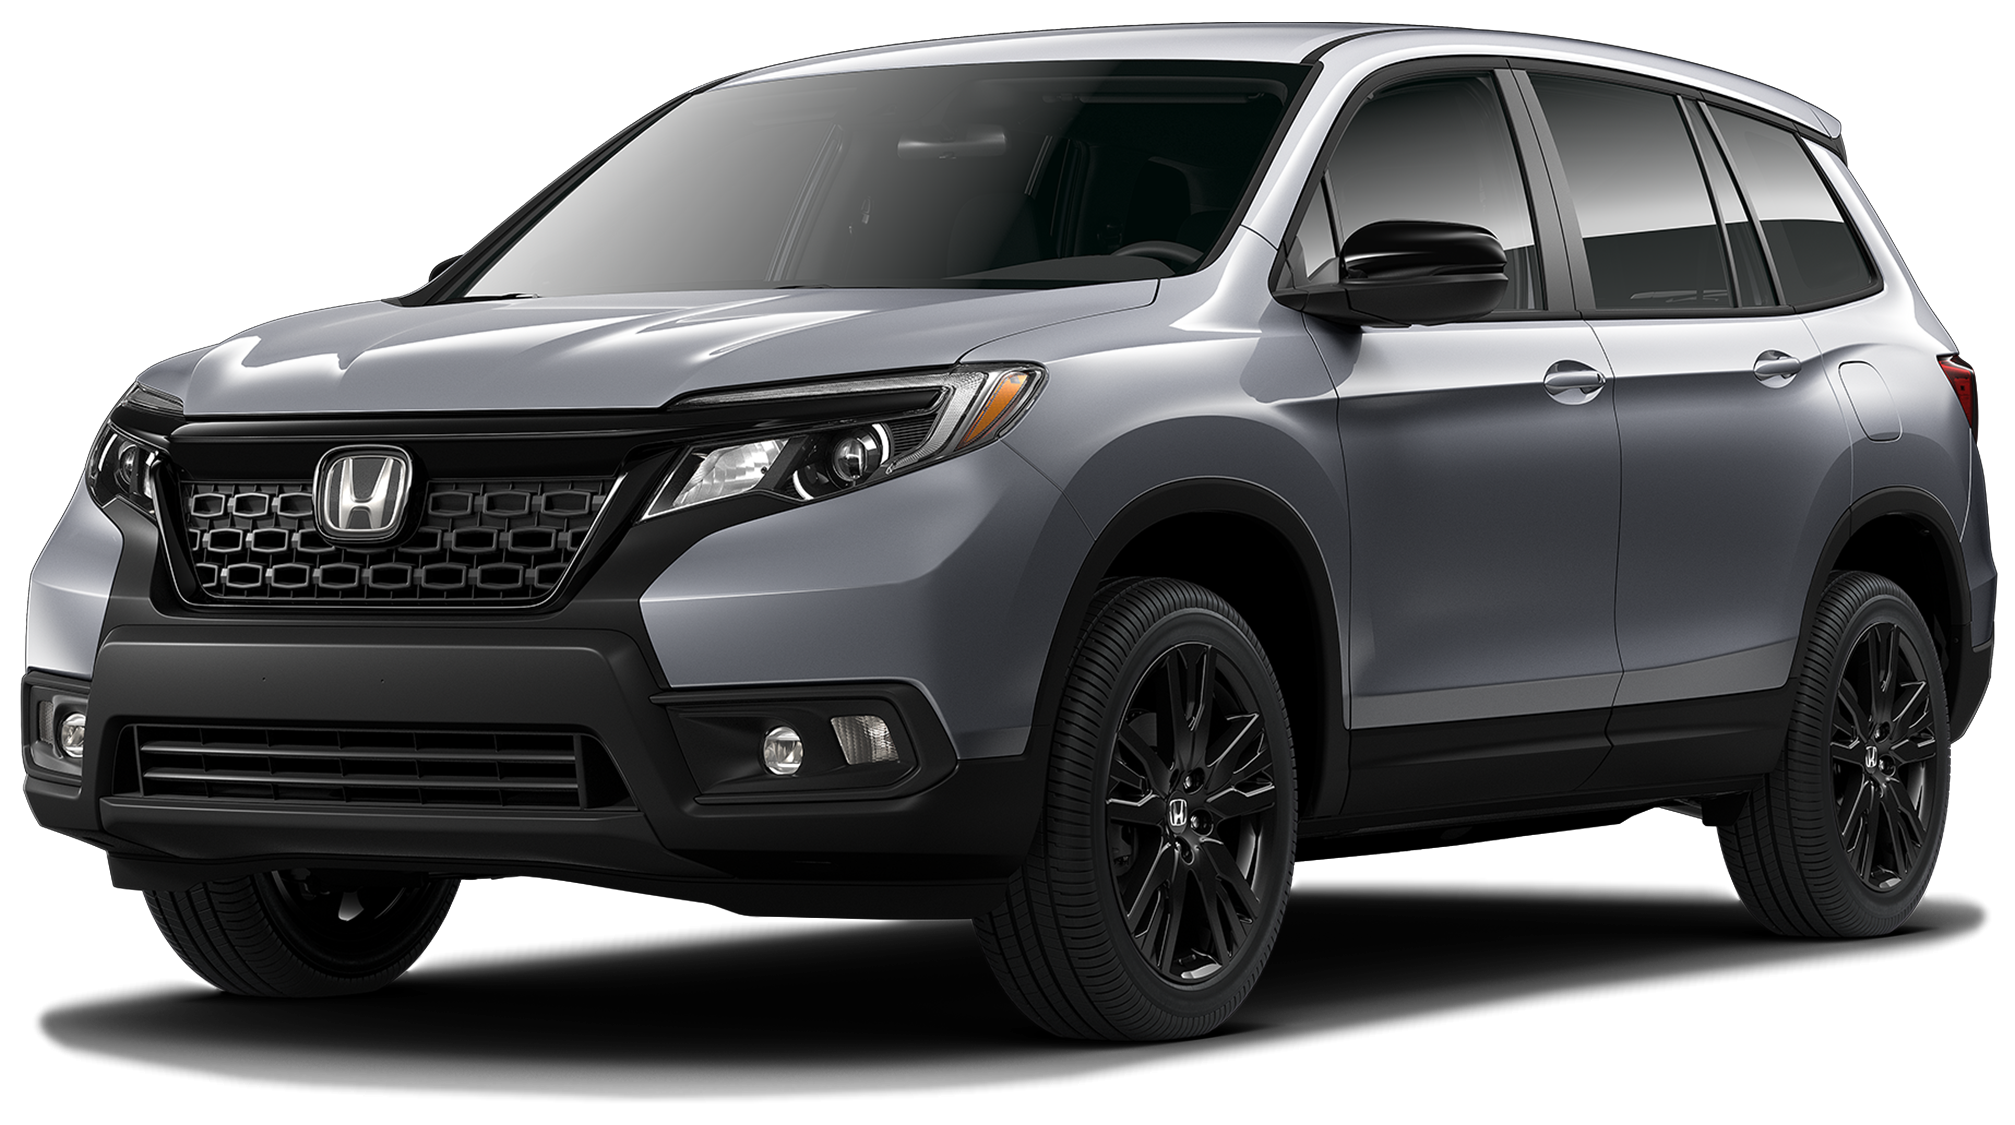 Honda Passport Lease O88ck4azrpfg0m Extra charges may apply at